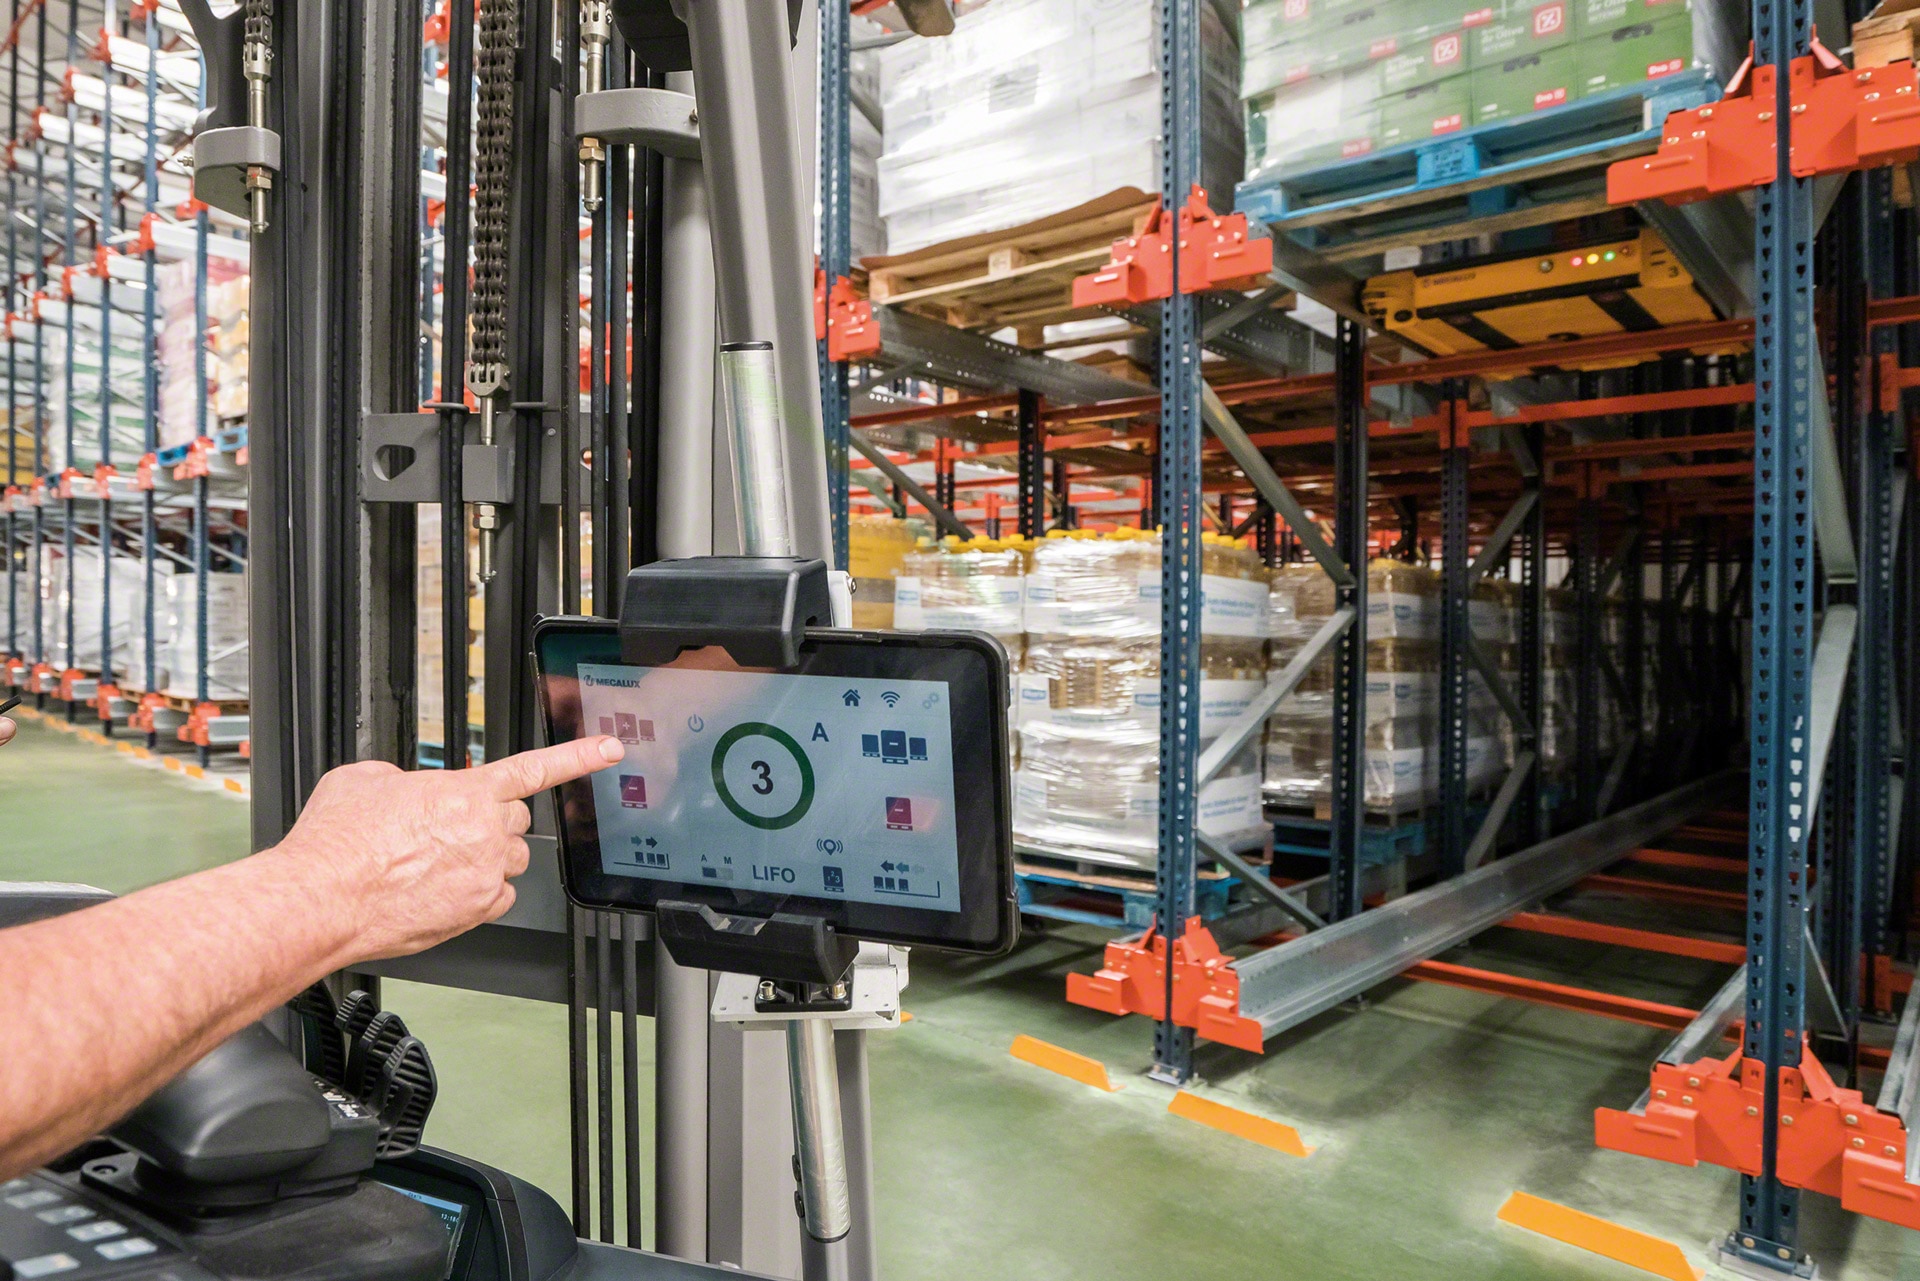 With the Mecalux EASY WMS system, one tablet can control up to 18 shuttles at a time